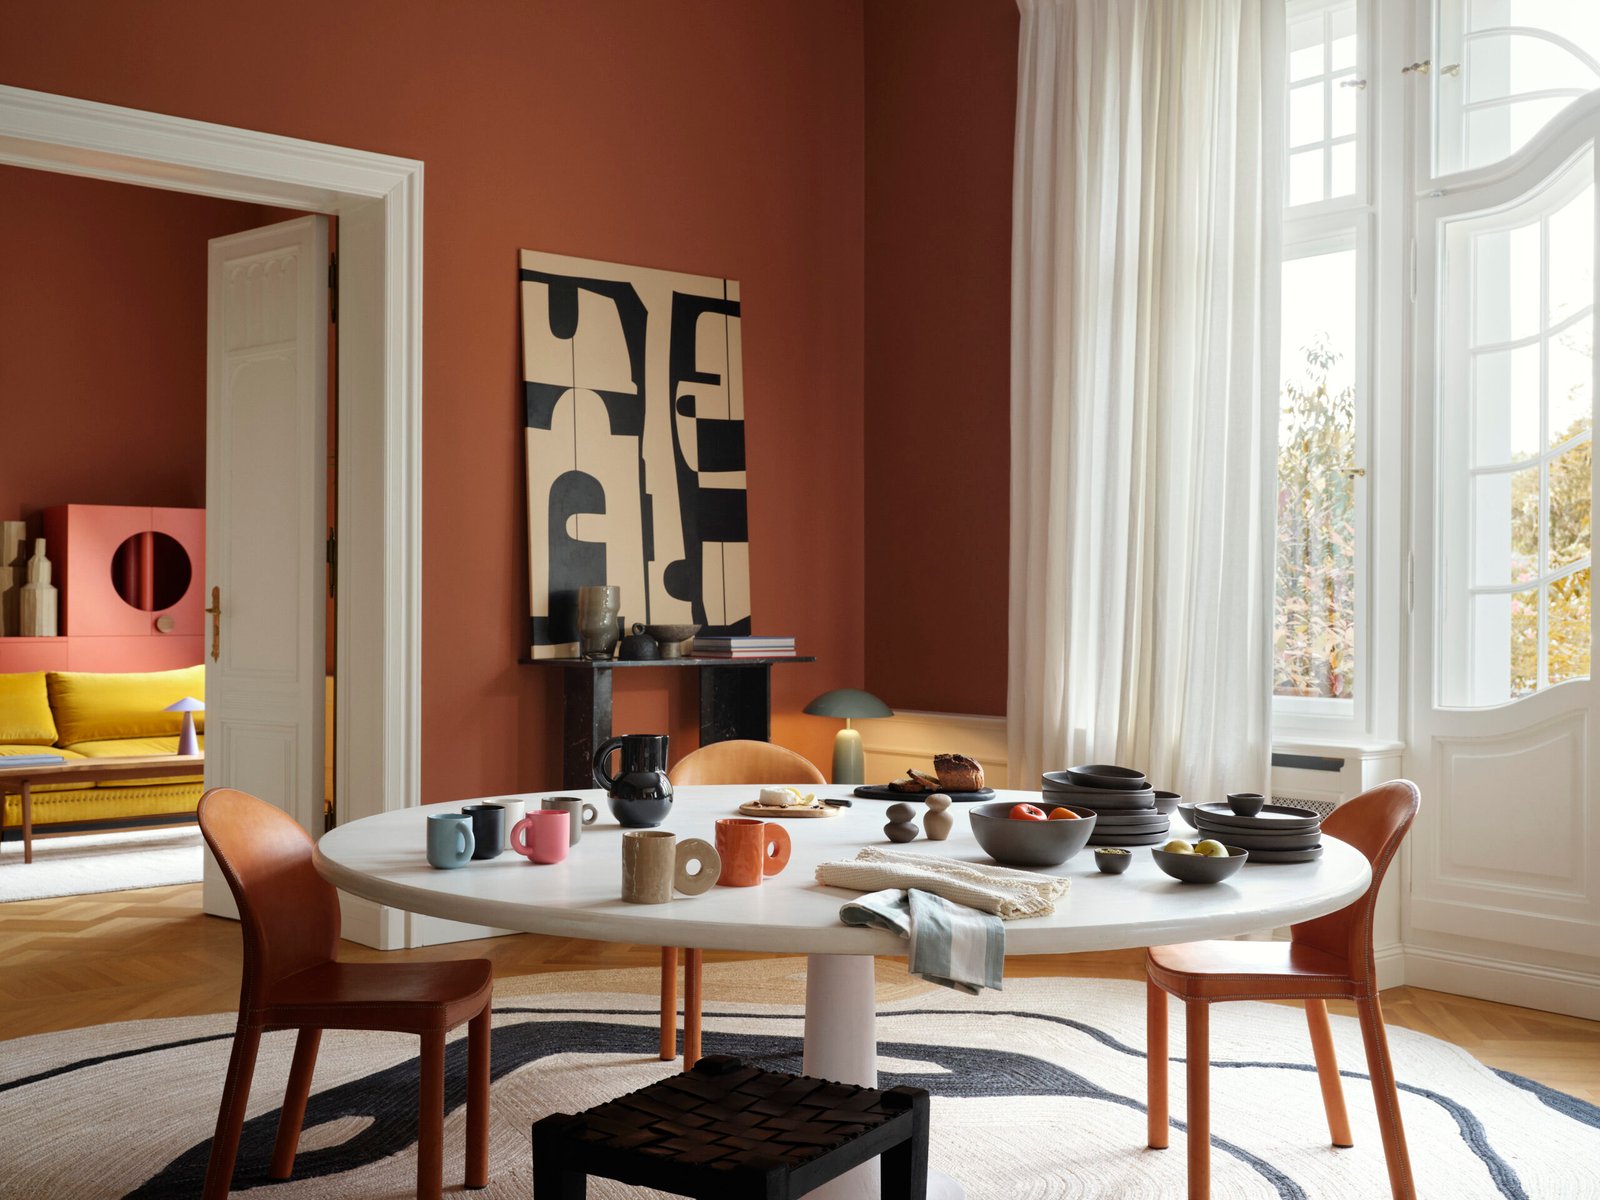 H&M HOME PRESENTS A FALL SEASON WITH INTERIOR PIECES THAT WILL MAKE YOUR HOME COME TO LIFE